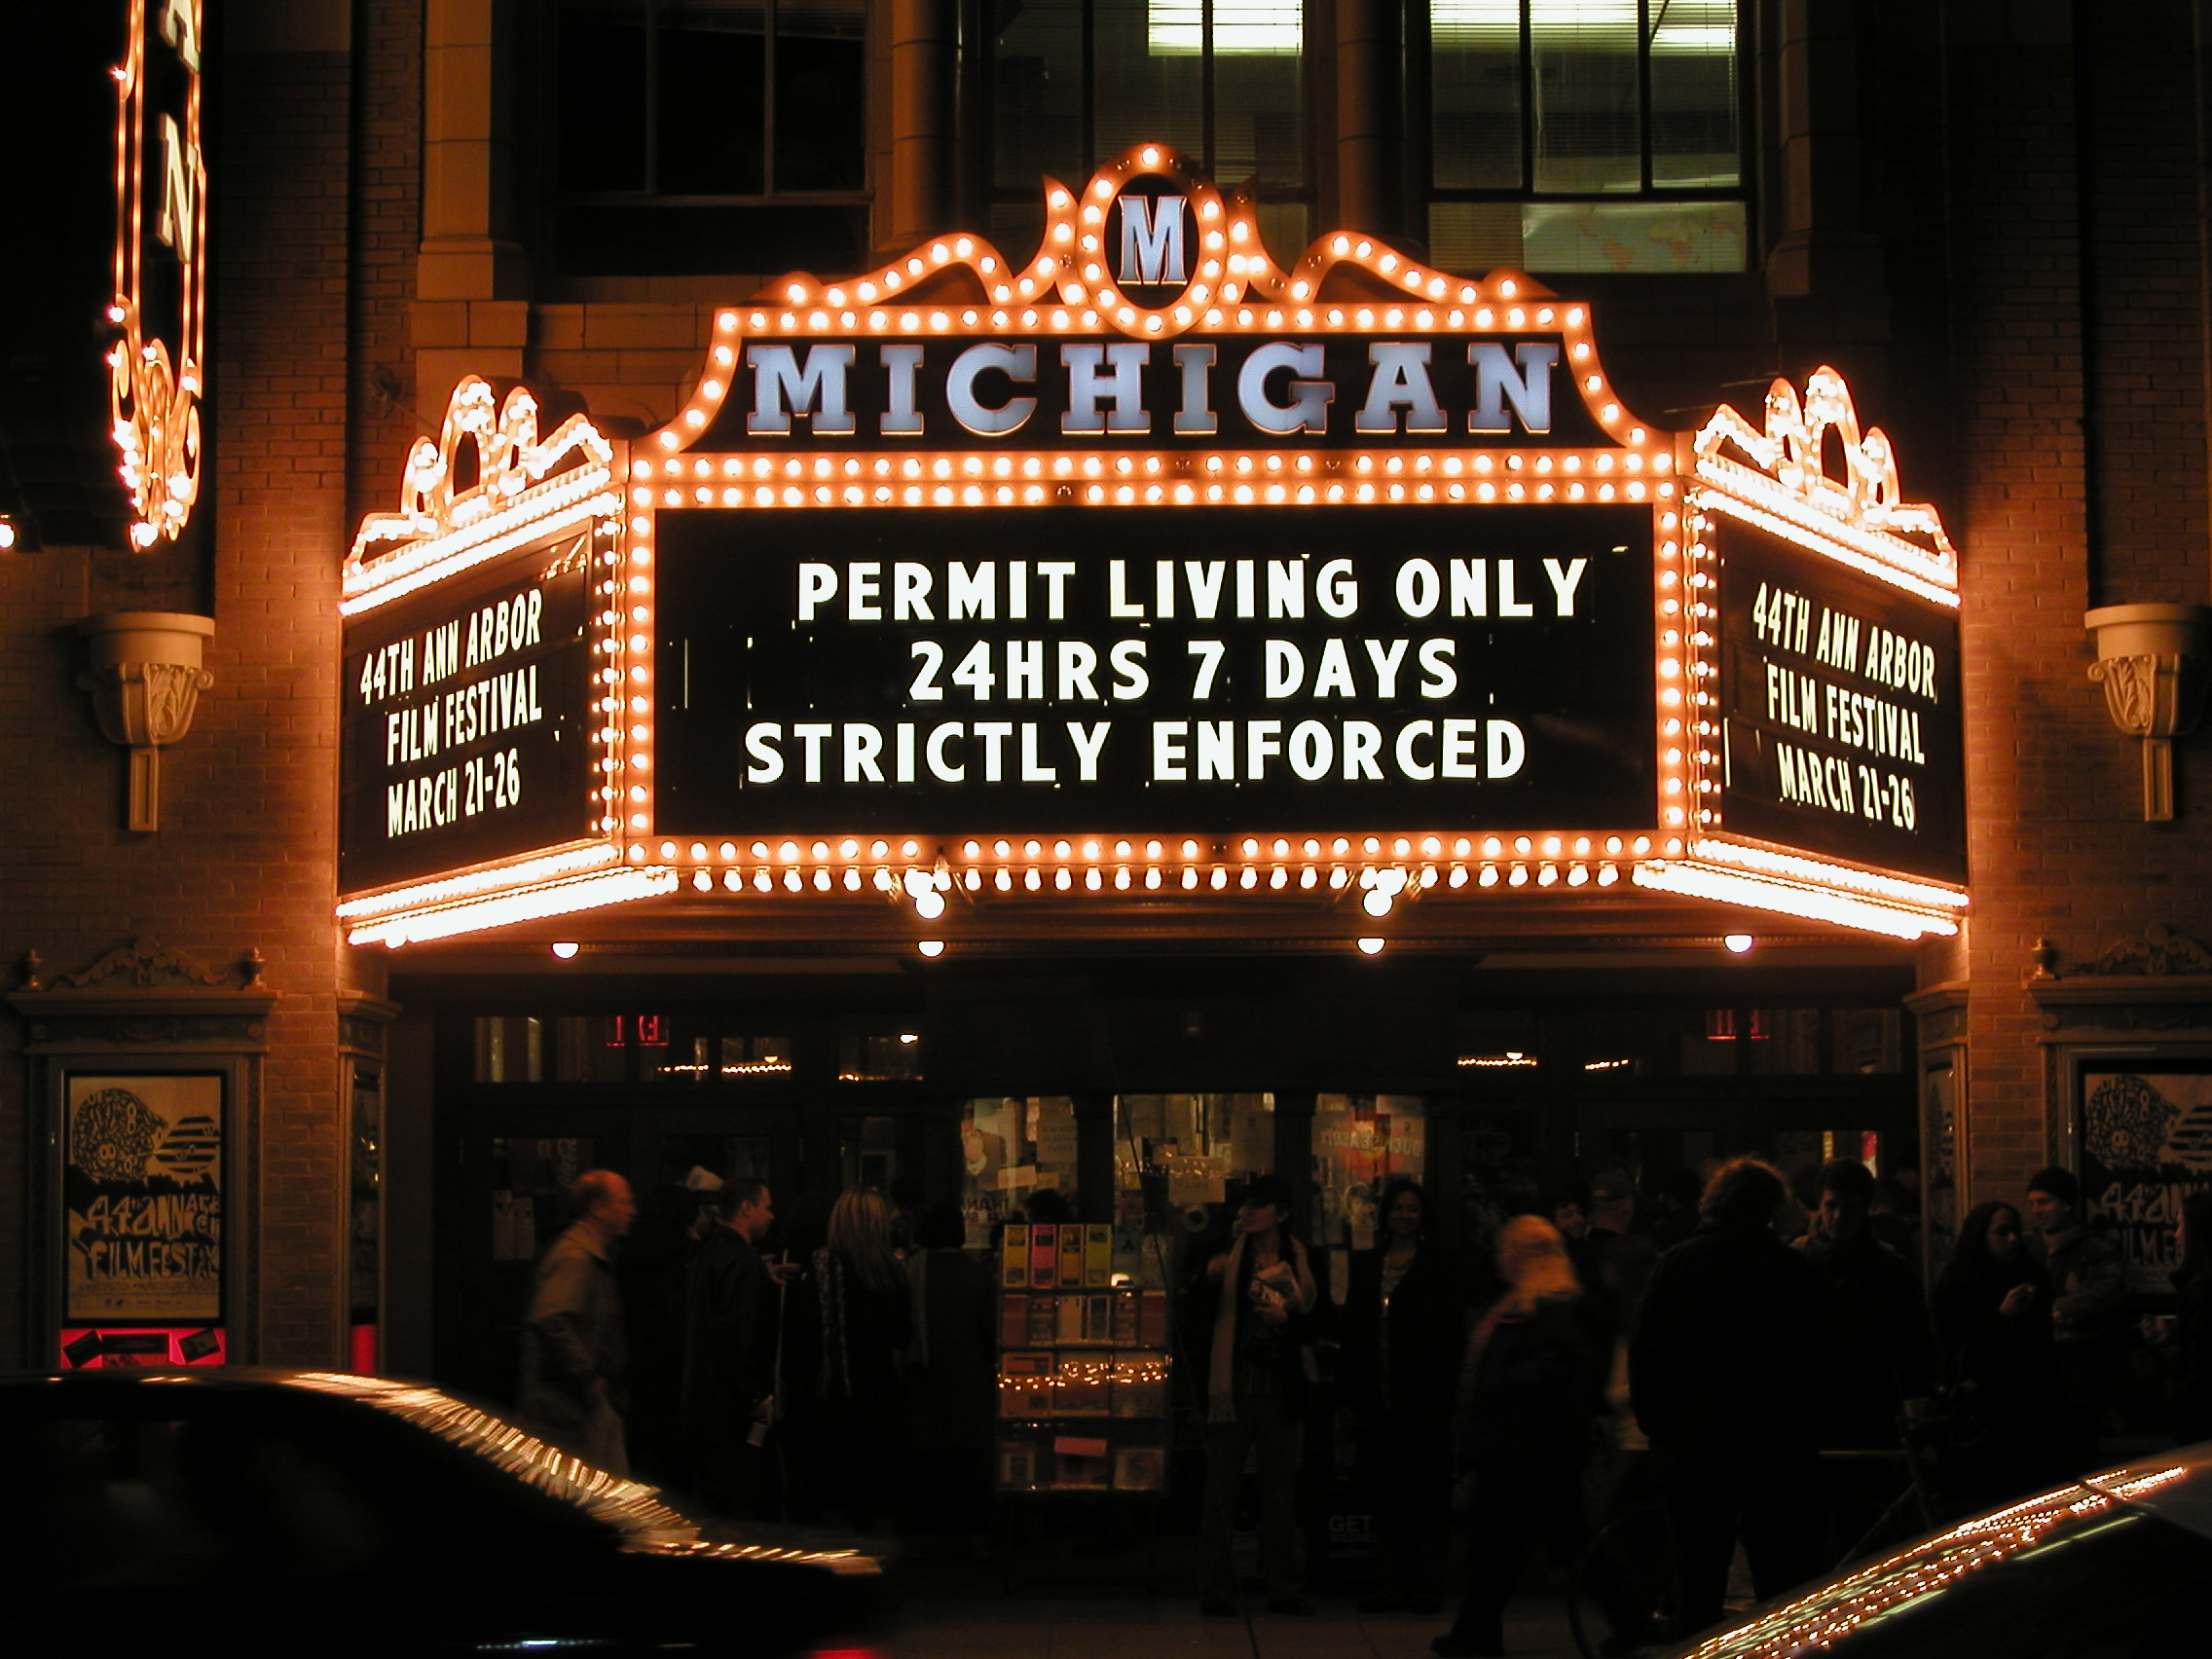 Michigan Theater marquee permit living only